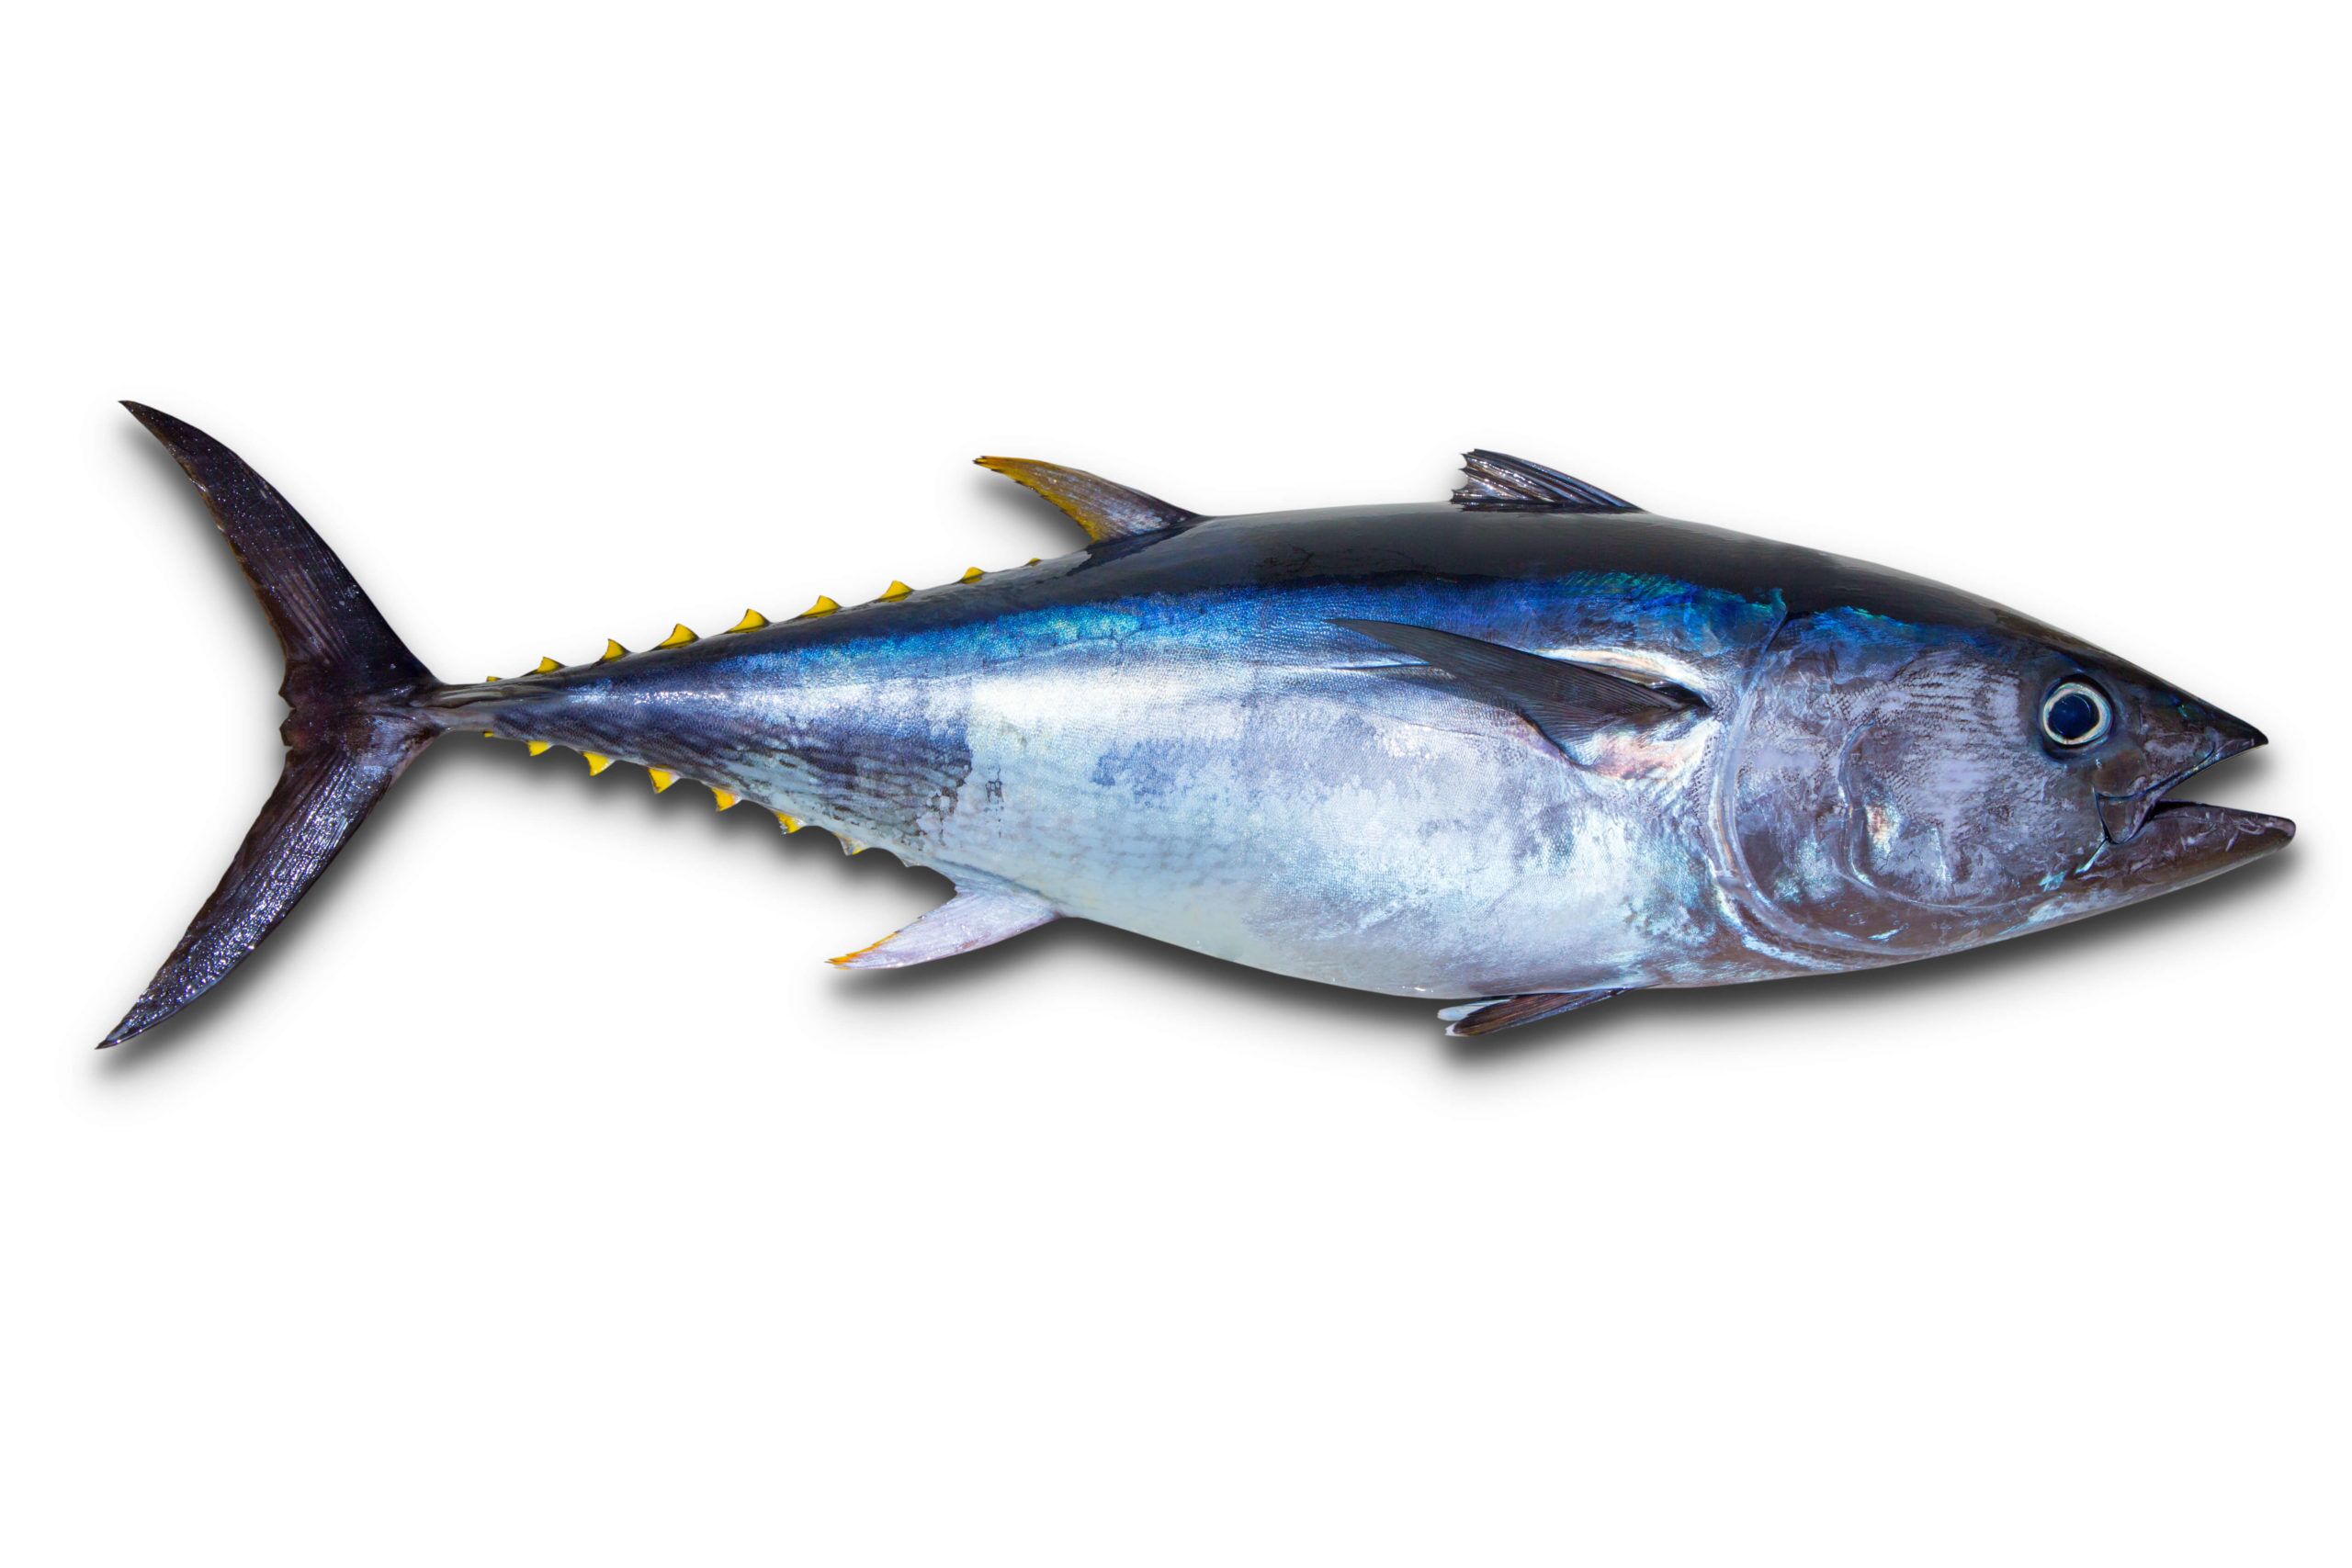 Yellowfin Tuna - Facts and Beyond